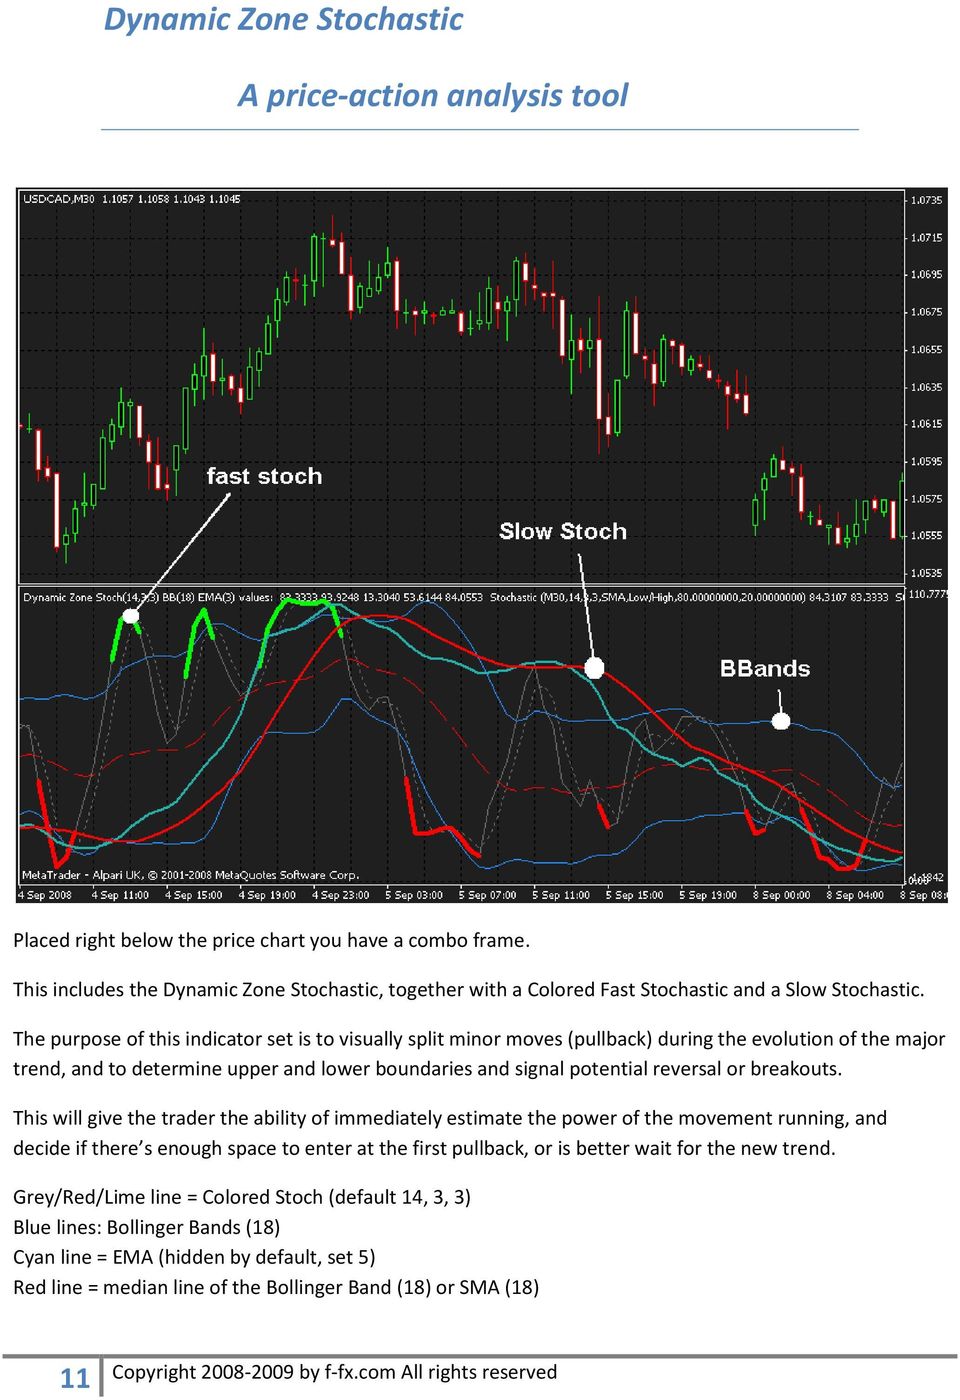 The purpose of this indicator set is to visually split minor moves (pullback) during the evolution of the major trend, and to determine upper and lower boundaries and signal potential reversal or